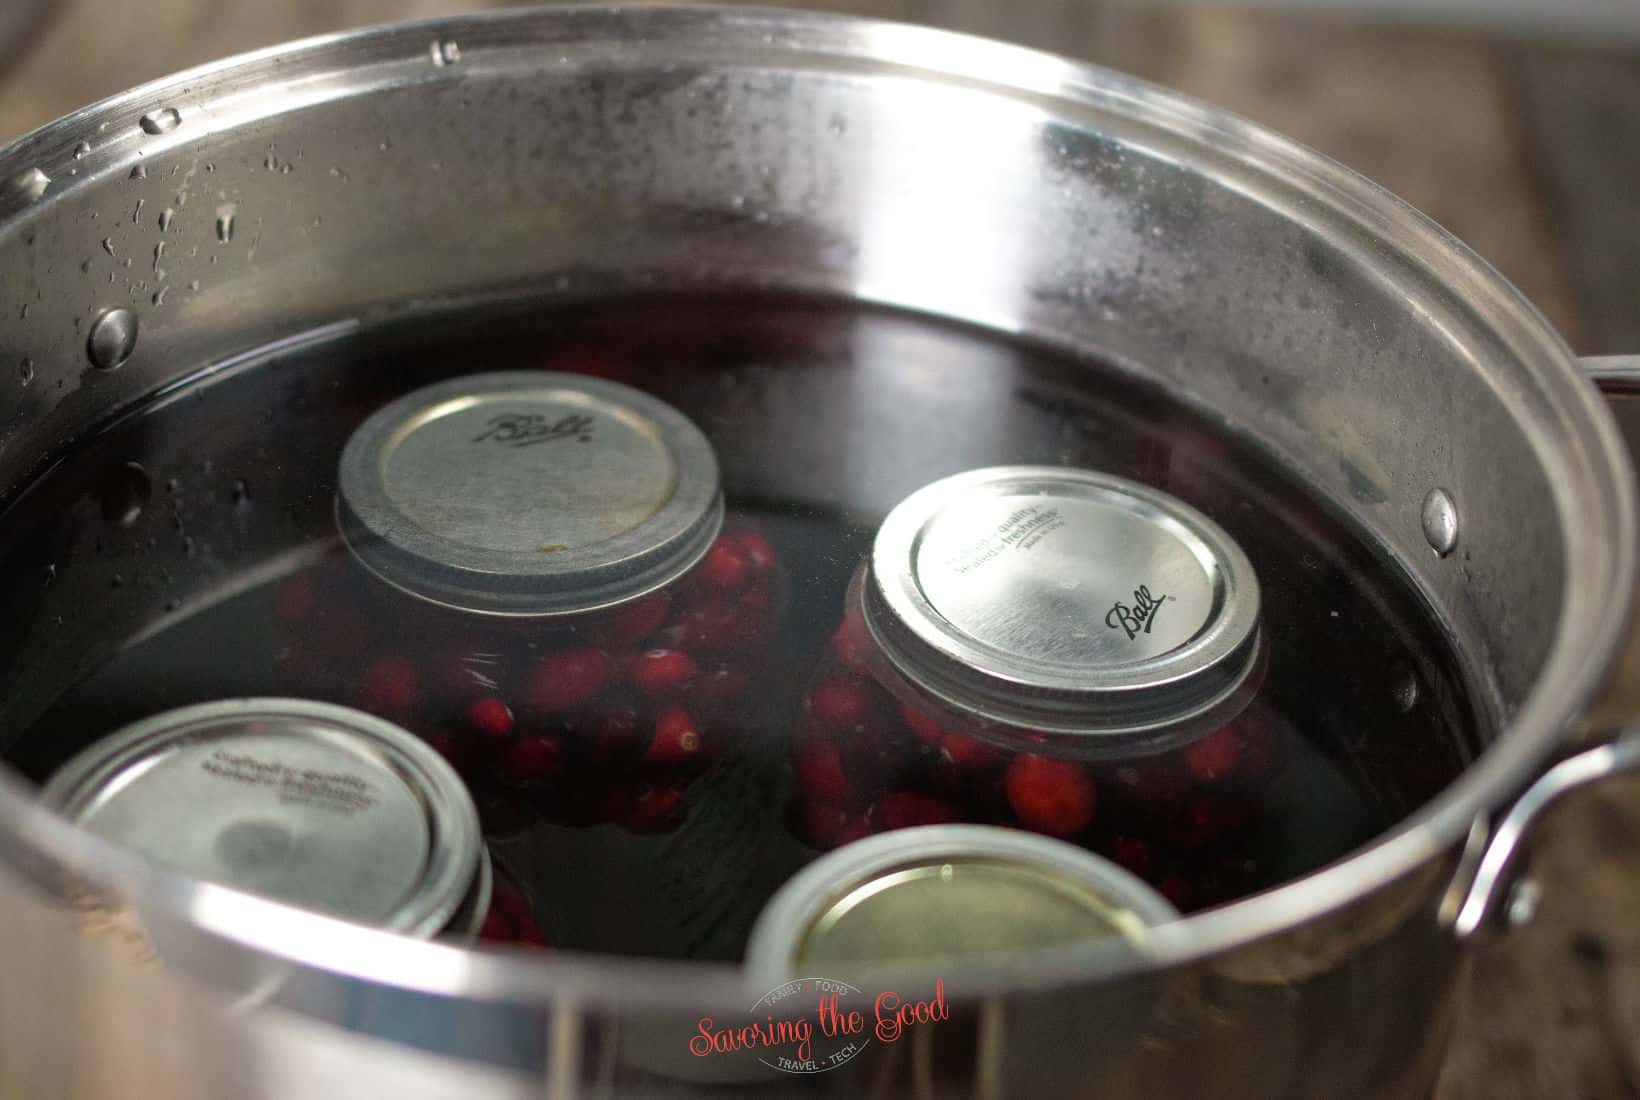 4 quart jars of cranberry juice processing in the water bath canner.